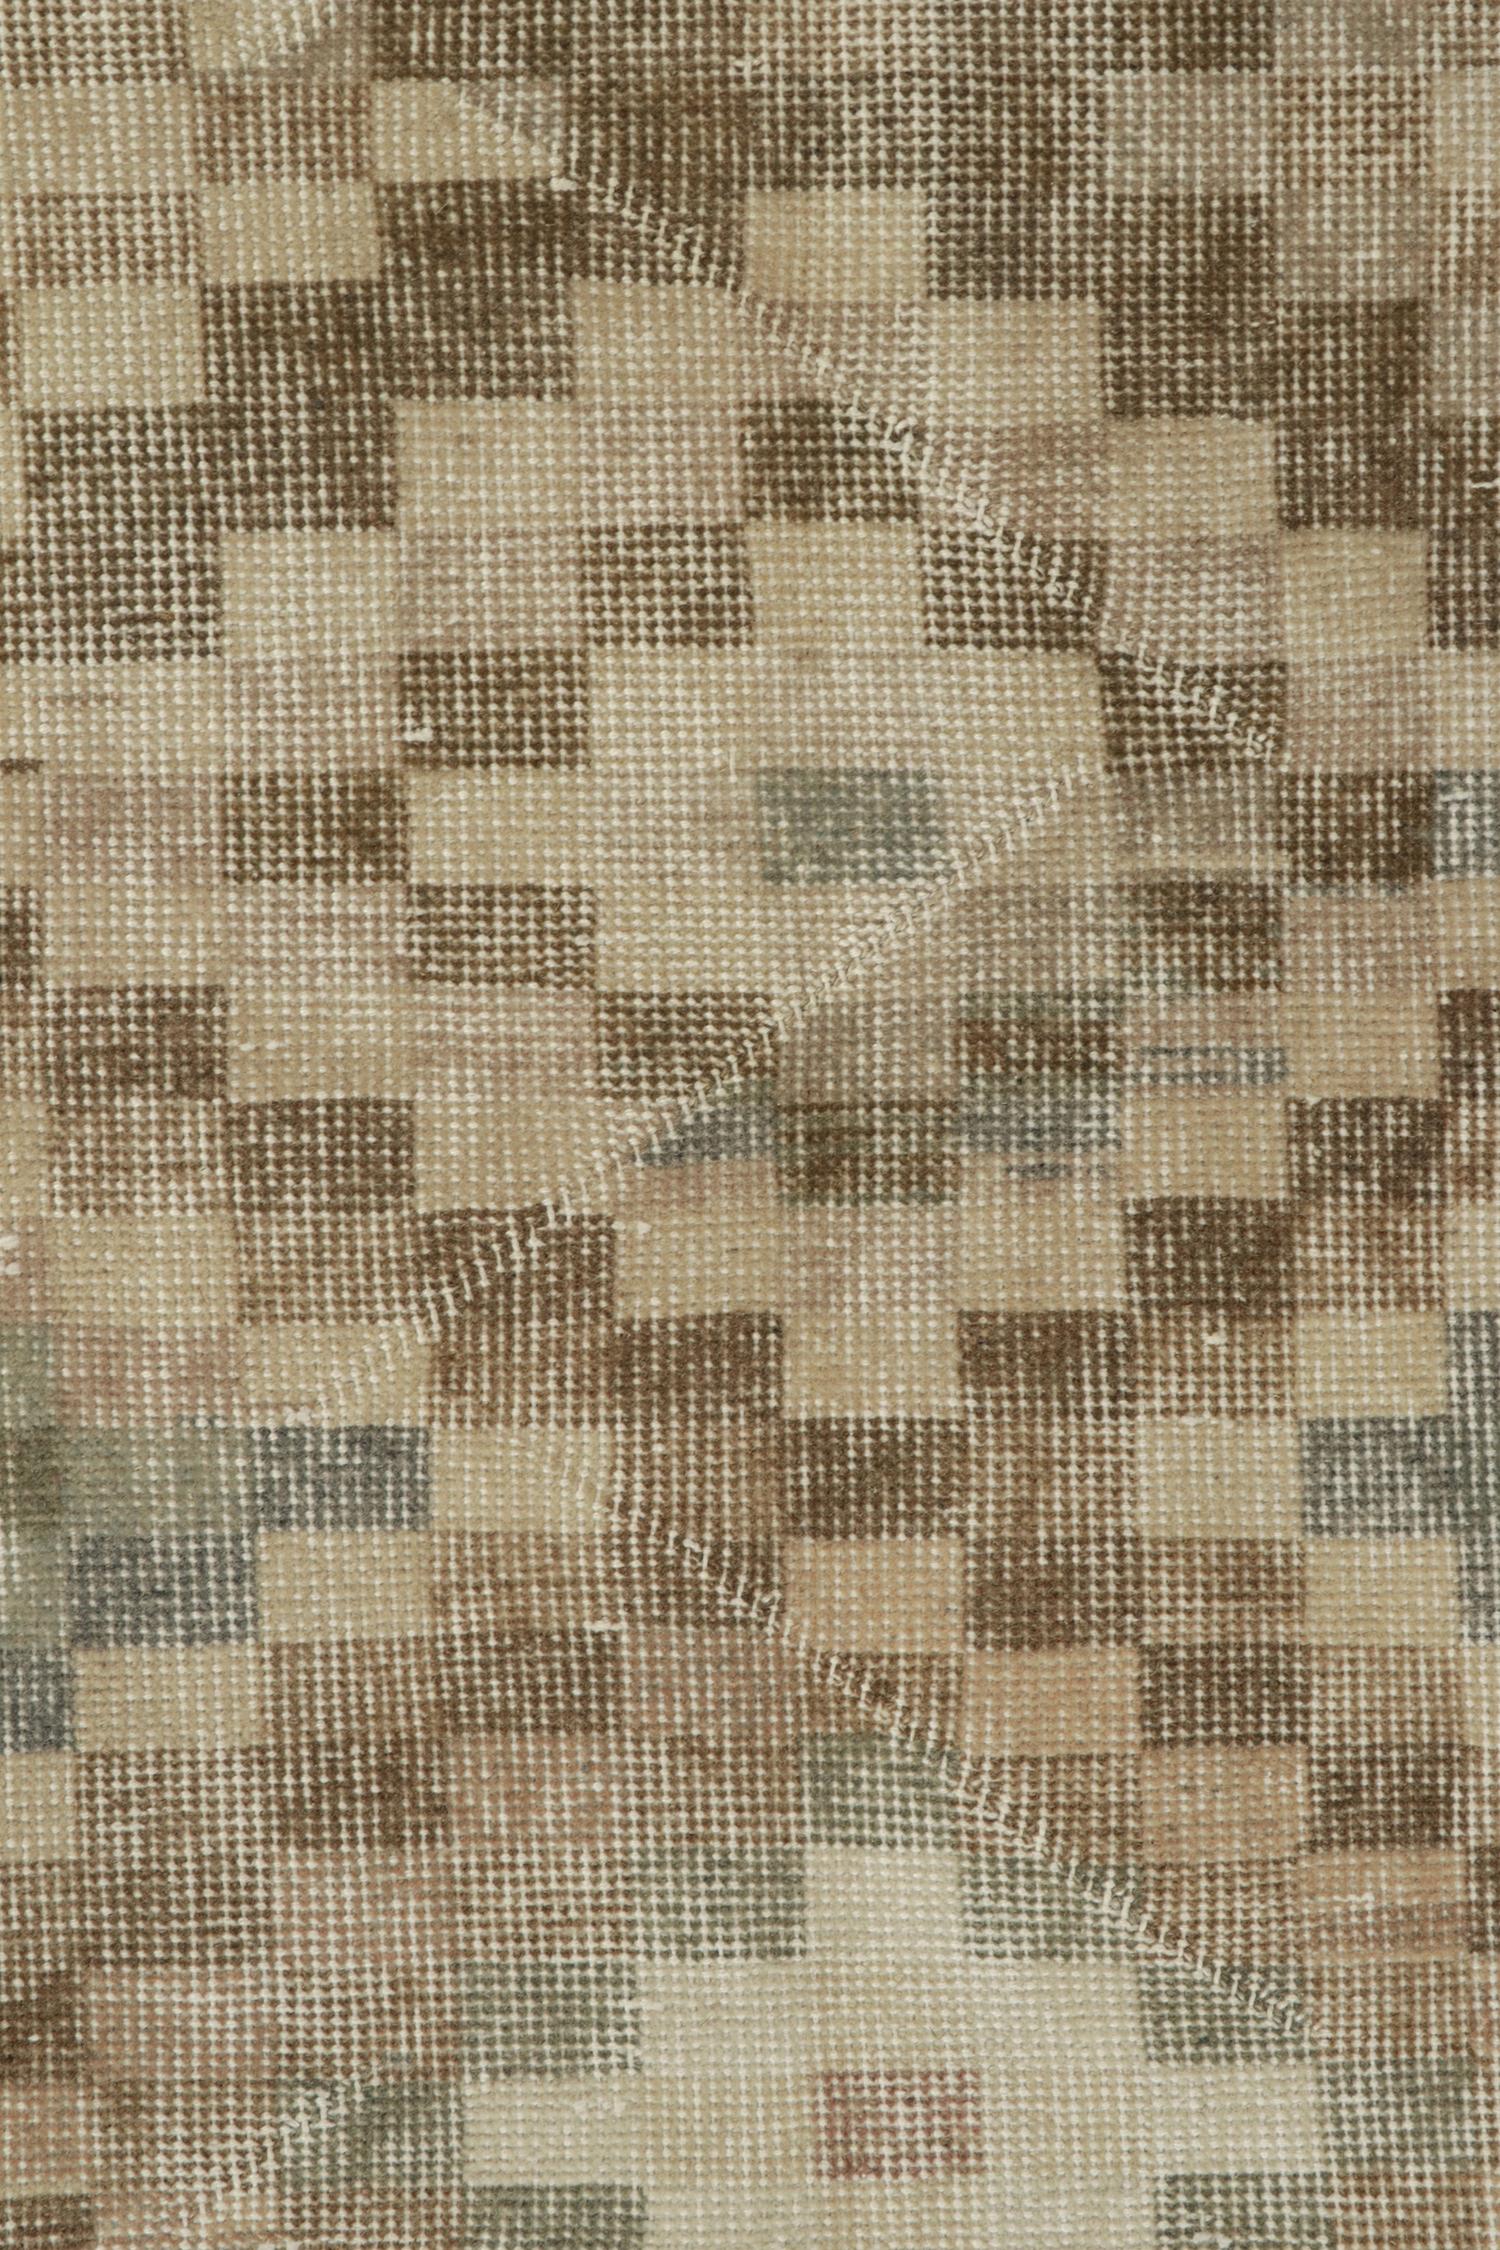 1960s Vintage Distressed Rug in Beige-Brown Geometric Pattern by Rug & Kilim In Good Condition For Sale In Long Island City, NY